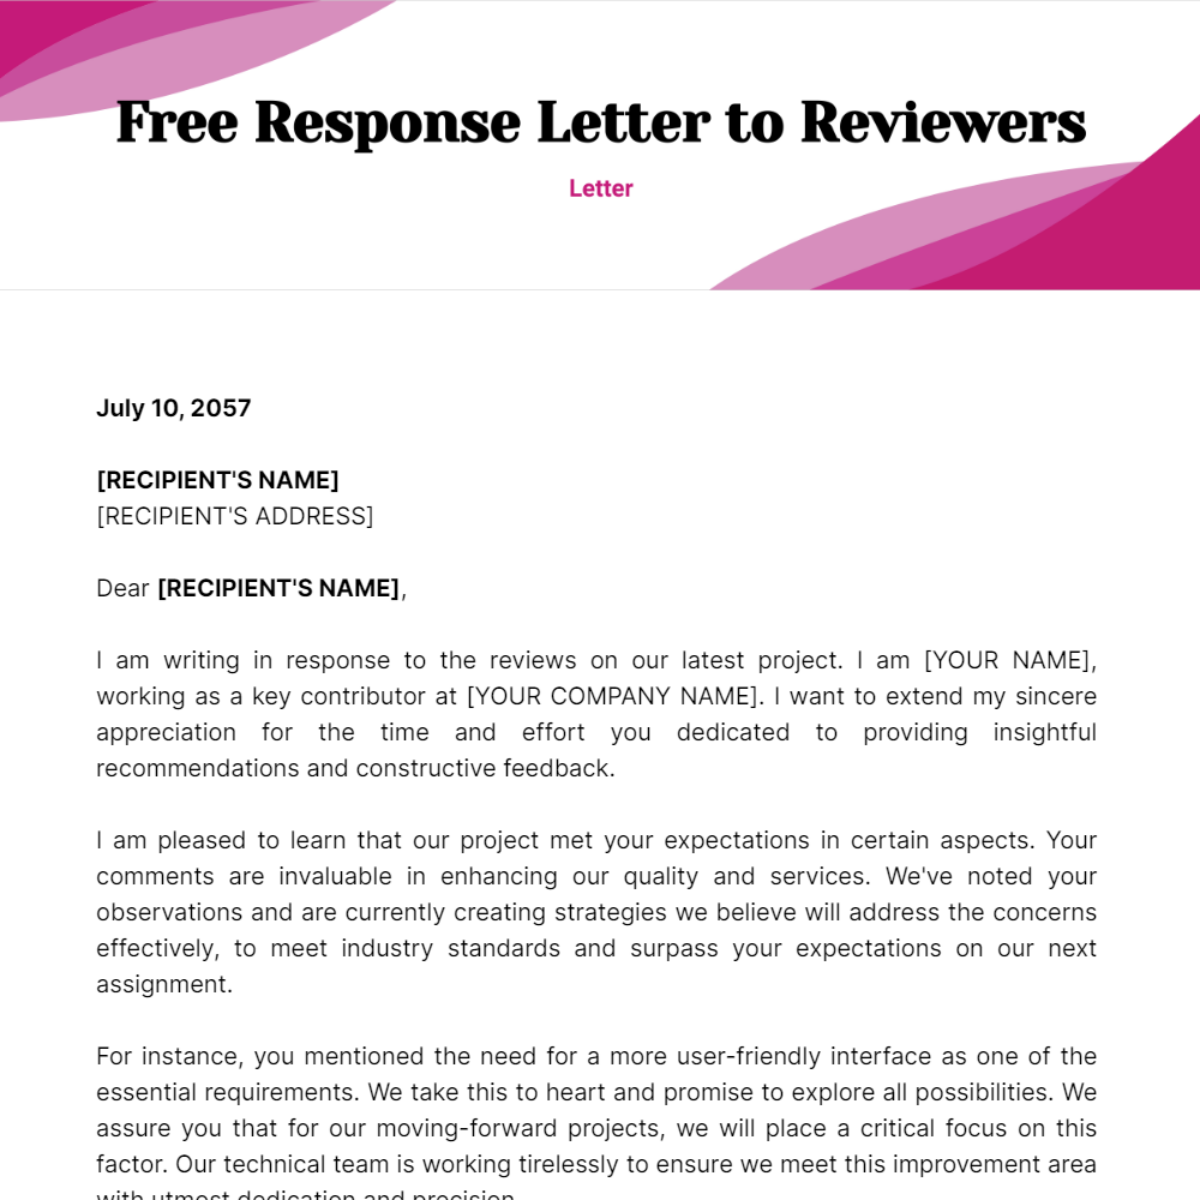 Free Response Letter to Reviewers